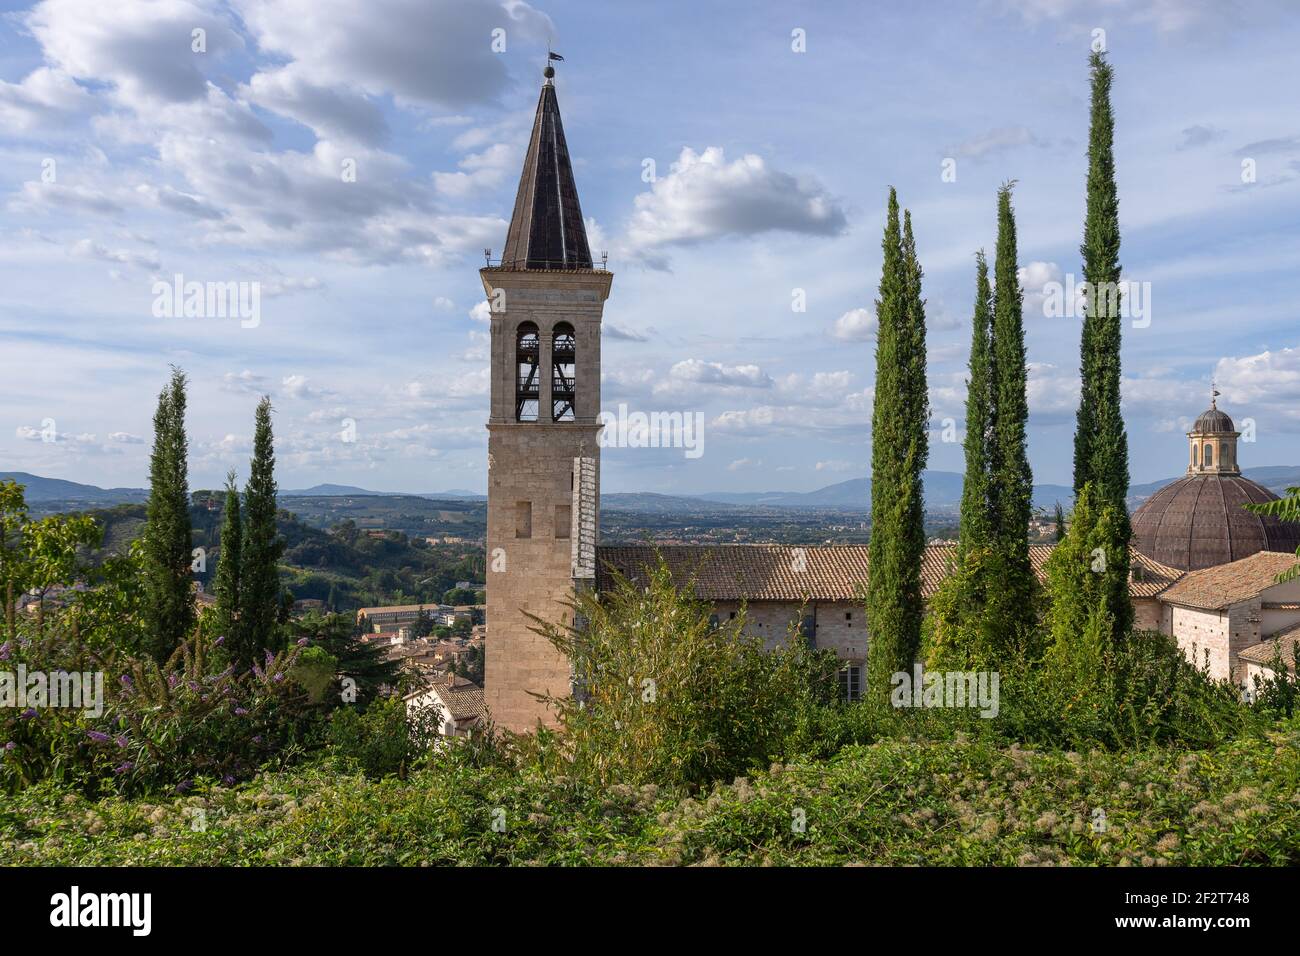 View of the bell tower of the medieval Cathedral of Santa Maria Assunta and the hills of Umbria. Spoleto, Italy Stock Photo